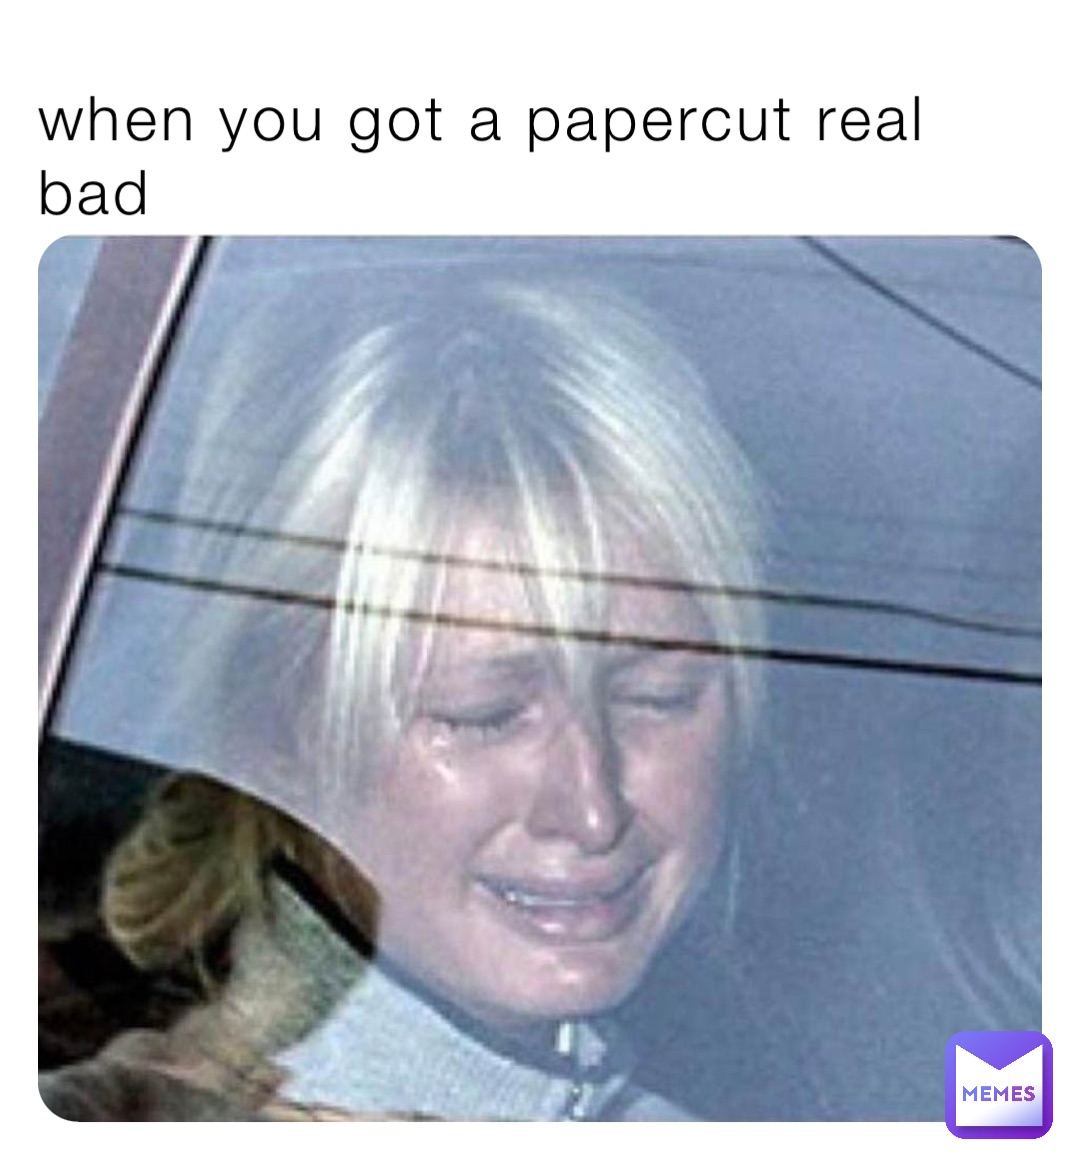 when you got a papercut real bad | @madefrombadsperm | Memes